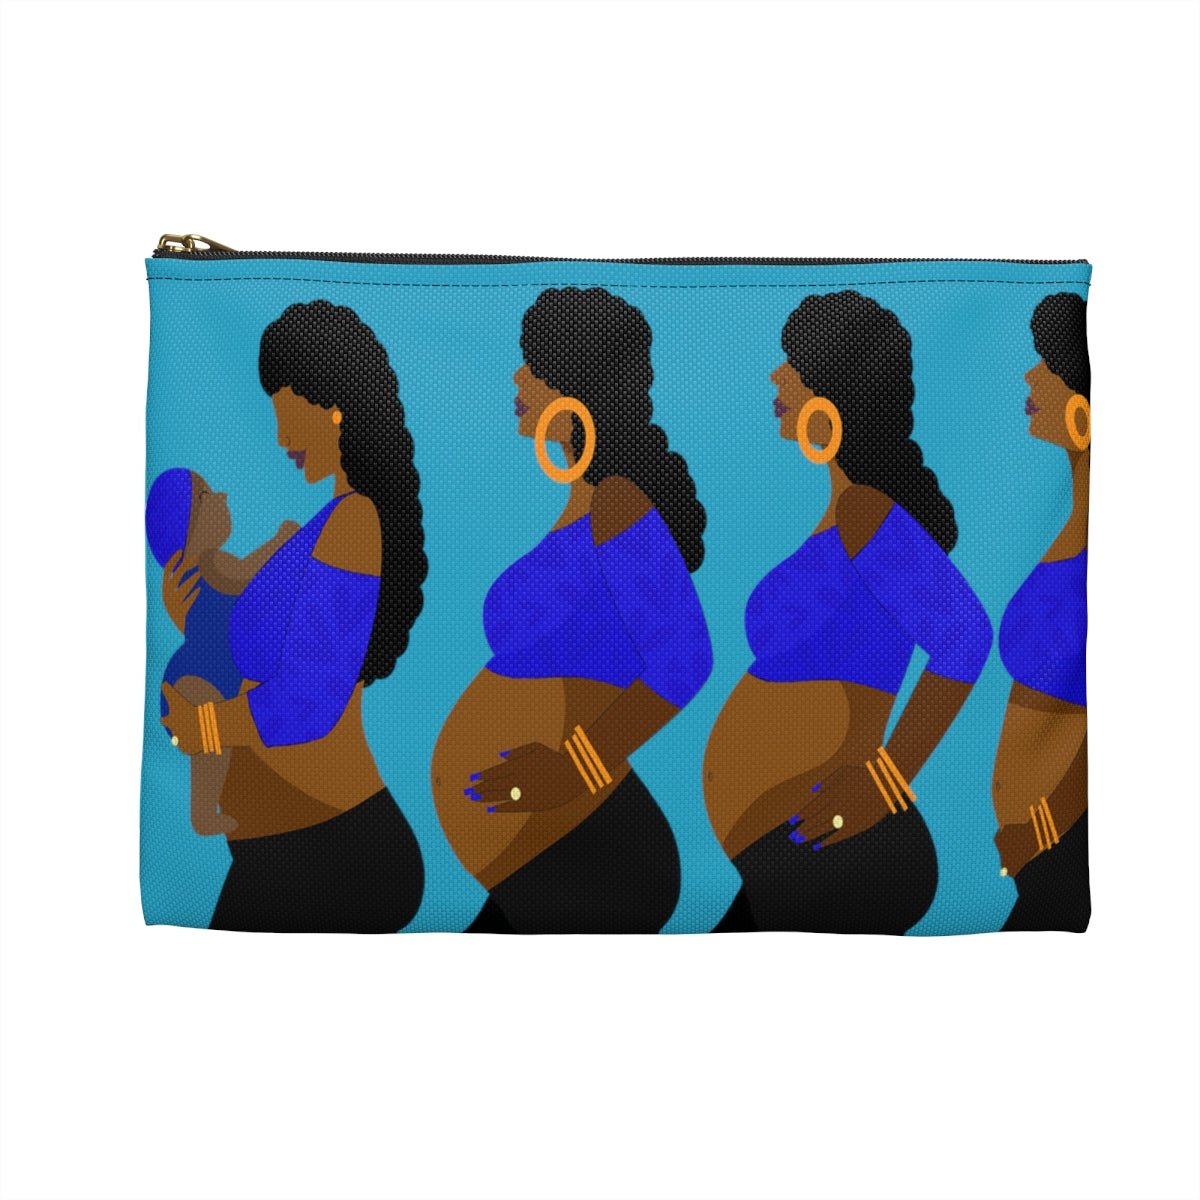 Pregnancy Journey Pouch - The Trini Gee